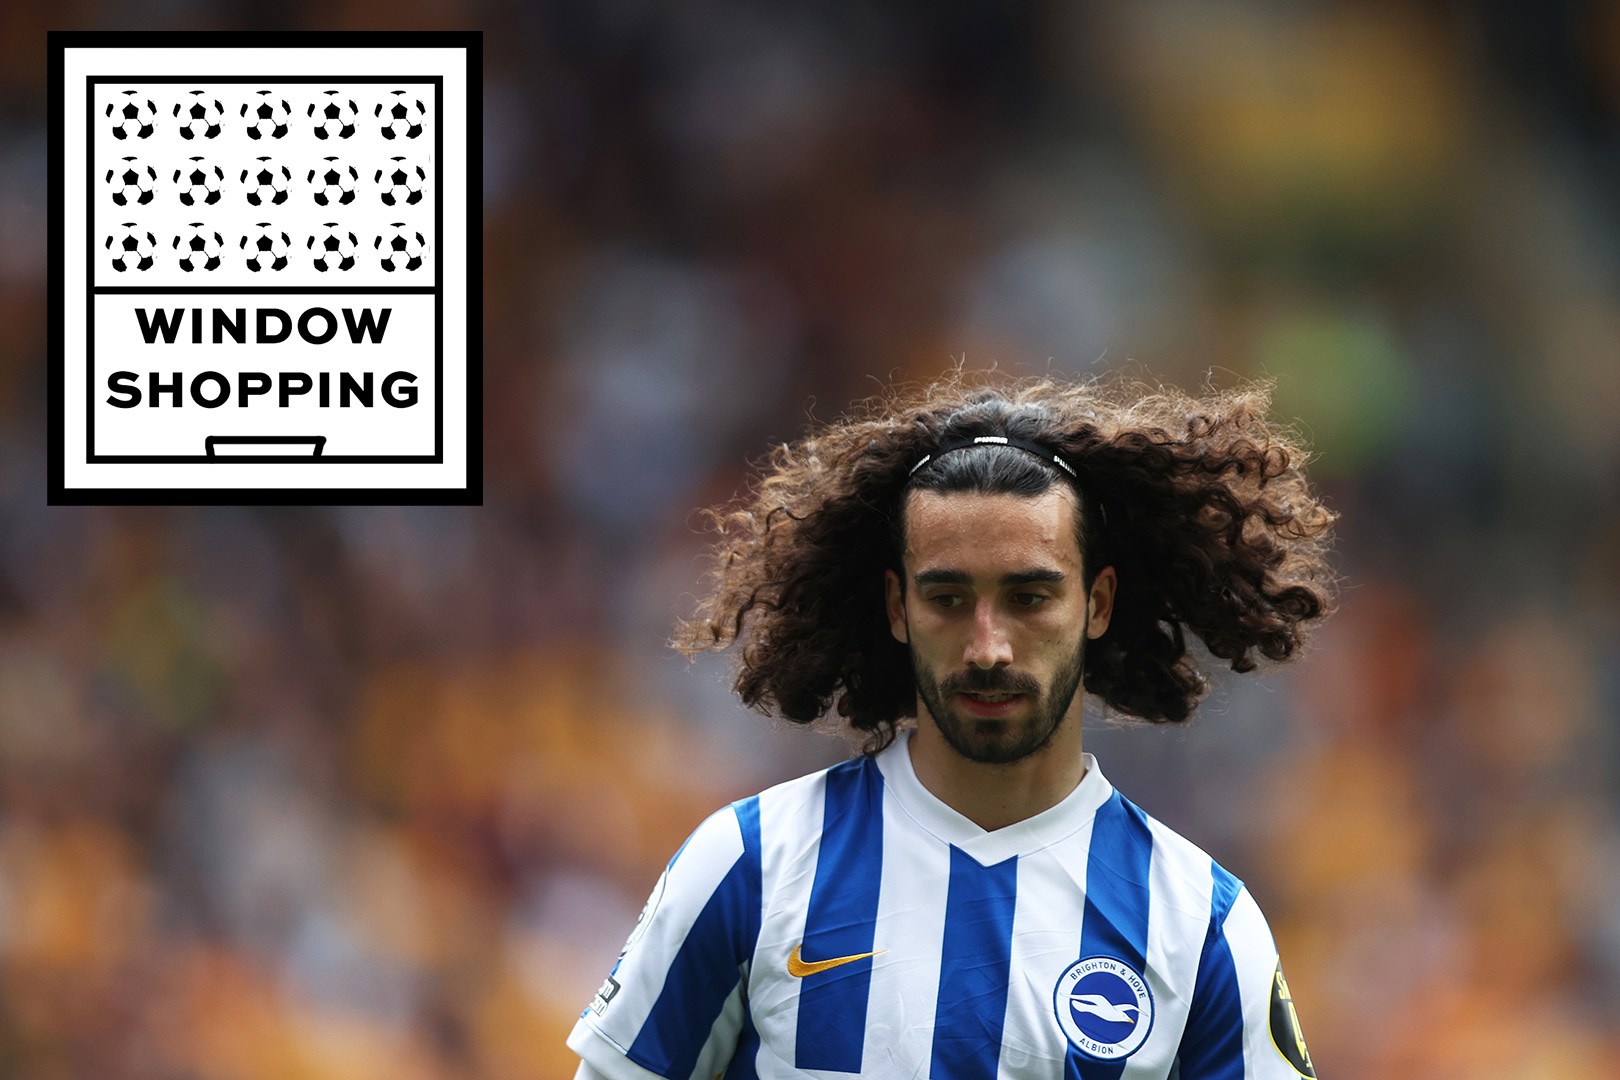 Marc Cucurella of Brighton & Hove Albion in action during the Premier League match between Wolverhampton Wanderers and Brighton & Hove Albion at Molineux on April 30, 2022 in Wolverhampton, England.